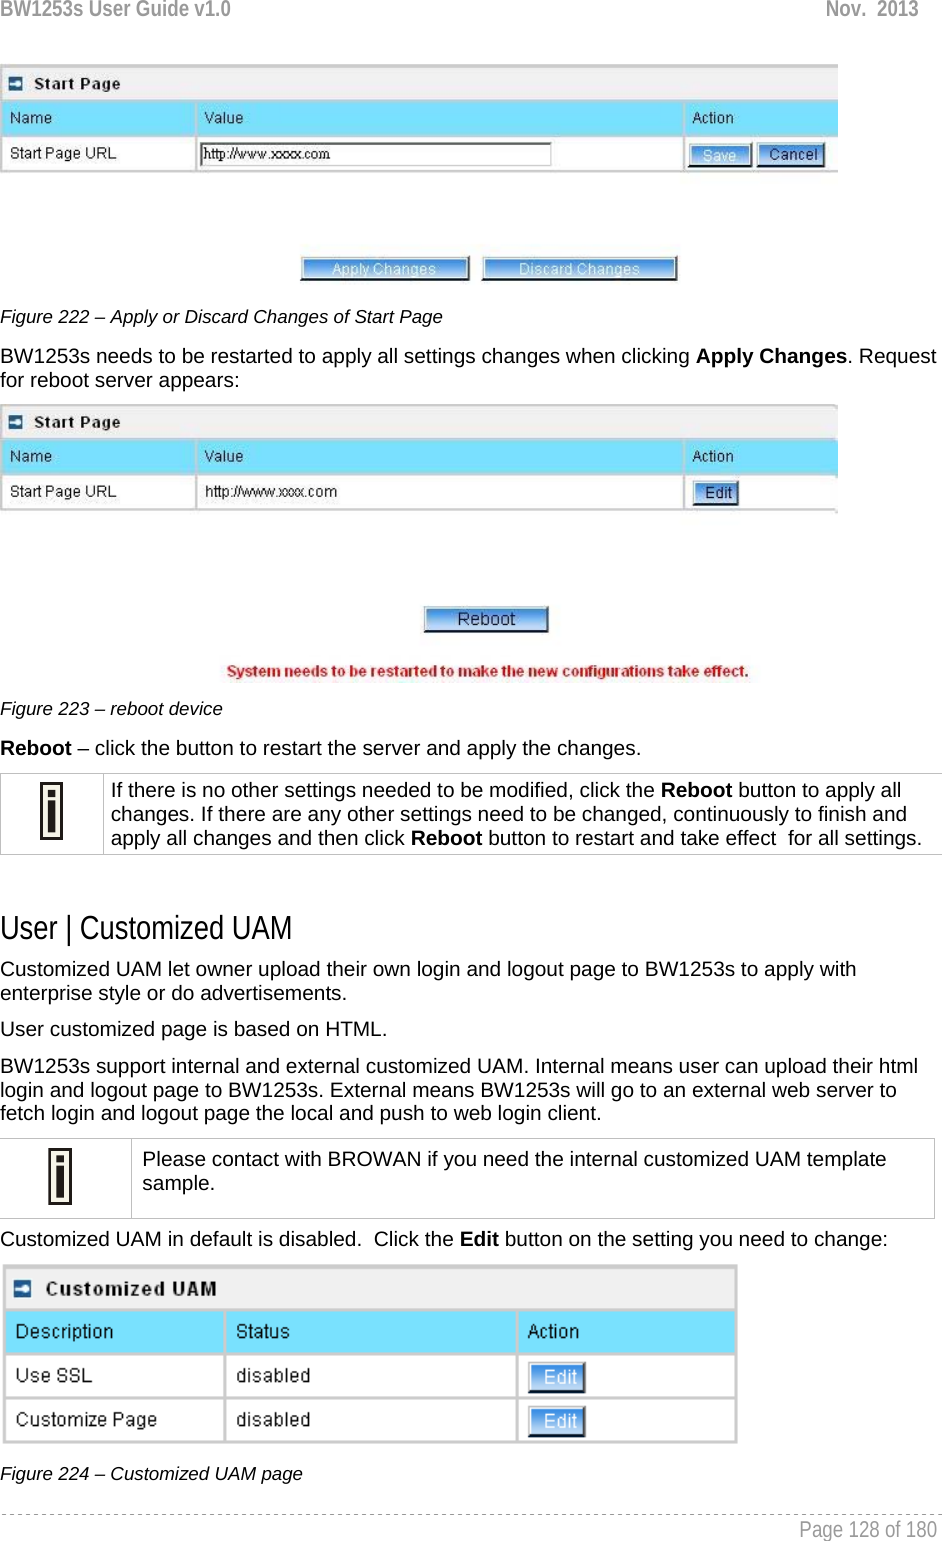 BW1253s User Guide v1.0  Nov.  2013     Page 128 of 180    Figure 222 – Apply or Discard Changes of Start Page BW1253s needs to be restarted to apply all settings changes when clicking Apply Changes. Request for reboot server appears:  Figure 223 – reboot device Reboot – click the button to restart the server and apply the changes.  If there is no other settings needed to be modified, click the Reboot button to apply all changes. If there are any other settings need to be changed, continuously to finish and apply all changes and then click Reboot button to restart and take effect  for all settings.  User | Customized UAM Customized UAM let owner upload their own login and logout page to BW1253s to apply with enterprise style or do advertisements. User customized page is based on HTML.  BW1253s support internal and external customized UAM. Internal means user can upload their html login and logout page to BW1253s. External means BW1253s will go to an external web server to fetch login and logout page the local and push to web login client.  Please contact with BROWAN if you need the internal customized UAM template sample. Customized UAM in default is disabled.  Click the Edit button on the setting you need to change:  Figure 224 – Customized UAM page 